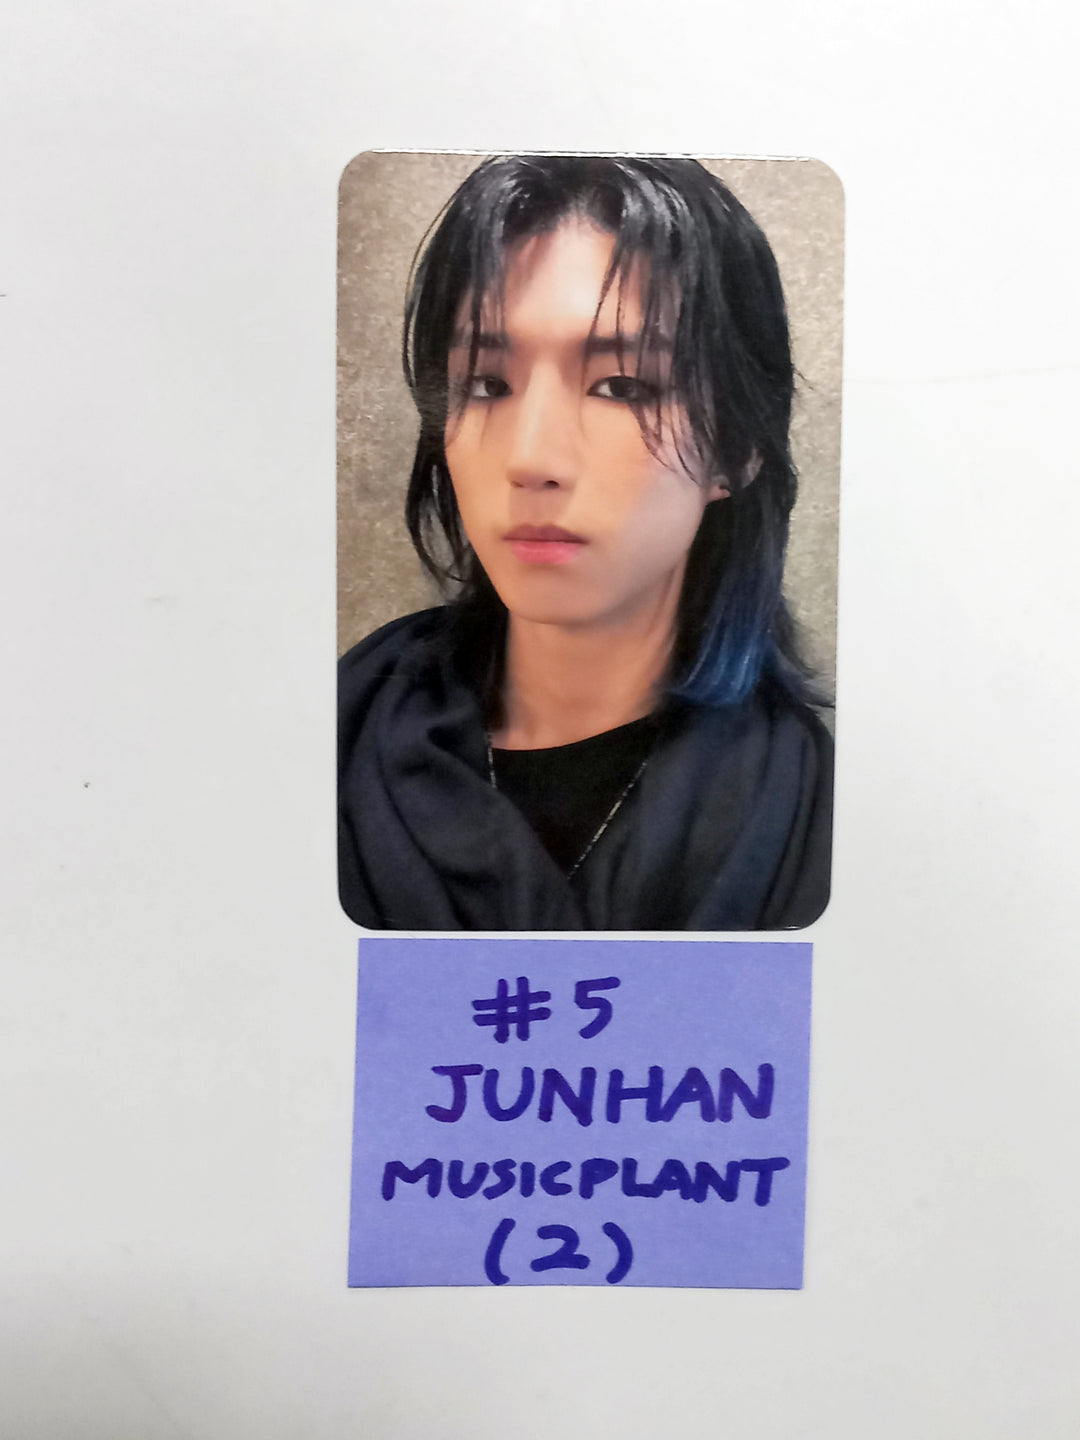 Xdinary Heroes "TroubleShooting" - Music Plant Pre-Order Benefit Photocard [24. 05. 03]